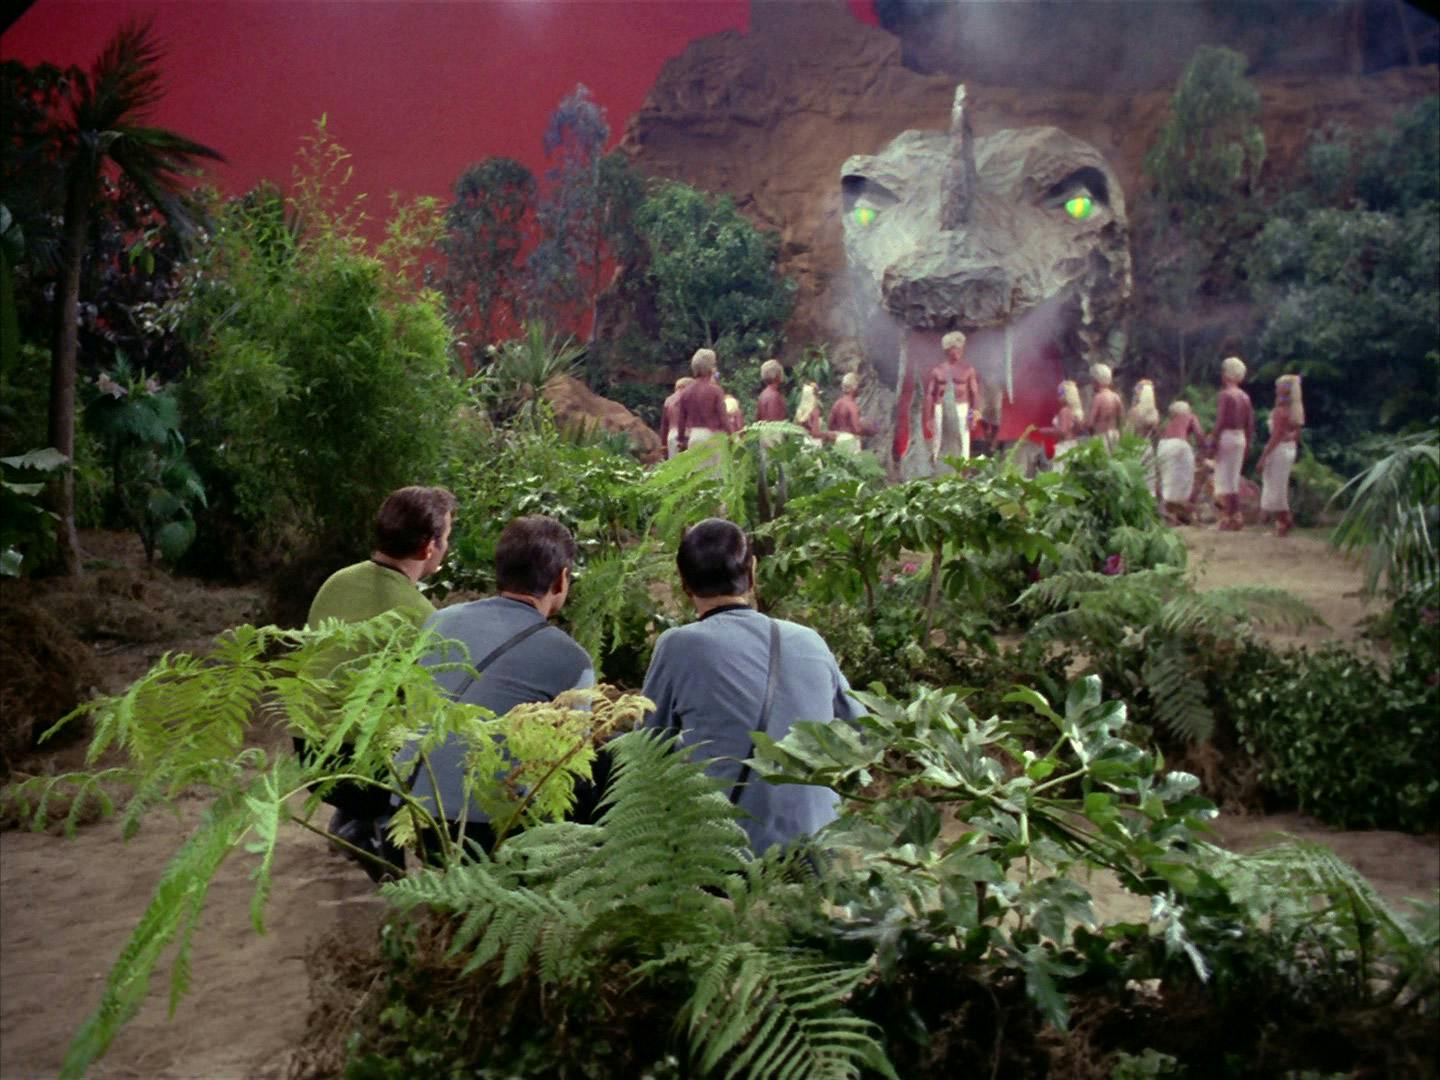 Kirk, McCoy, and Spock crouch behind some shrubbery as the people of Gamma Trianguli VI convene in front of the computer Vaal in 'The Apple'